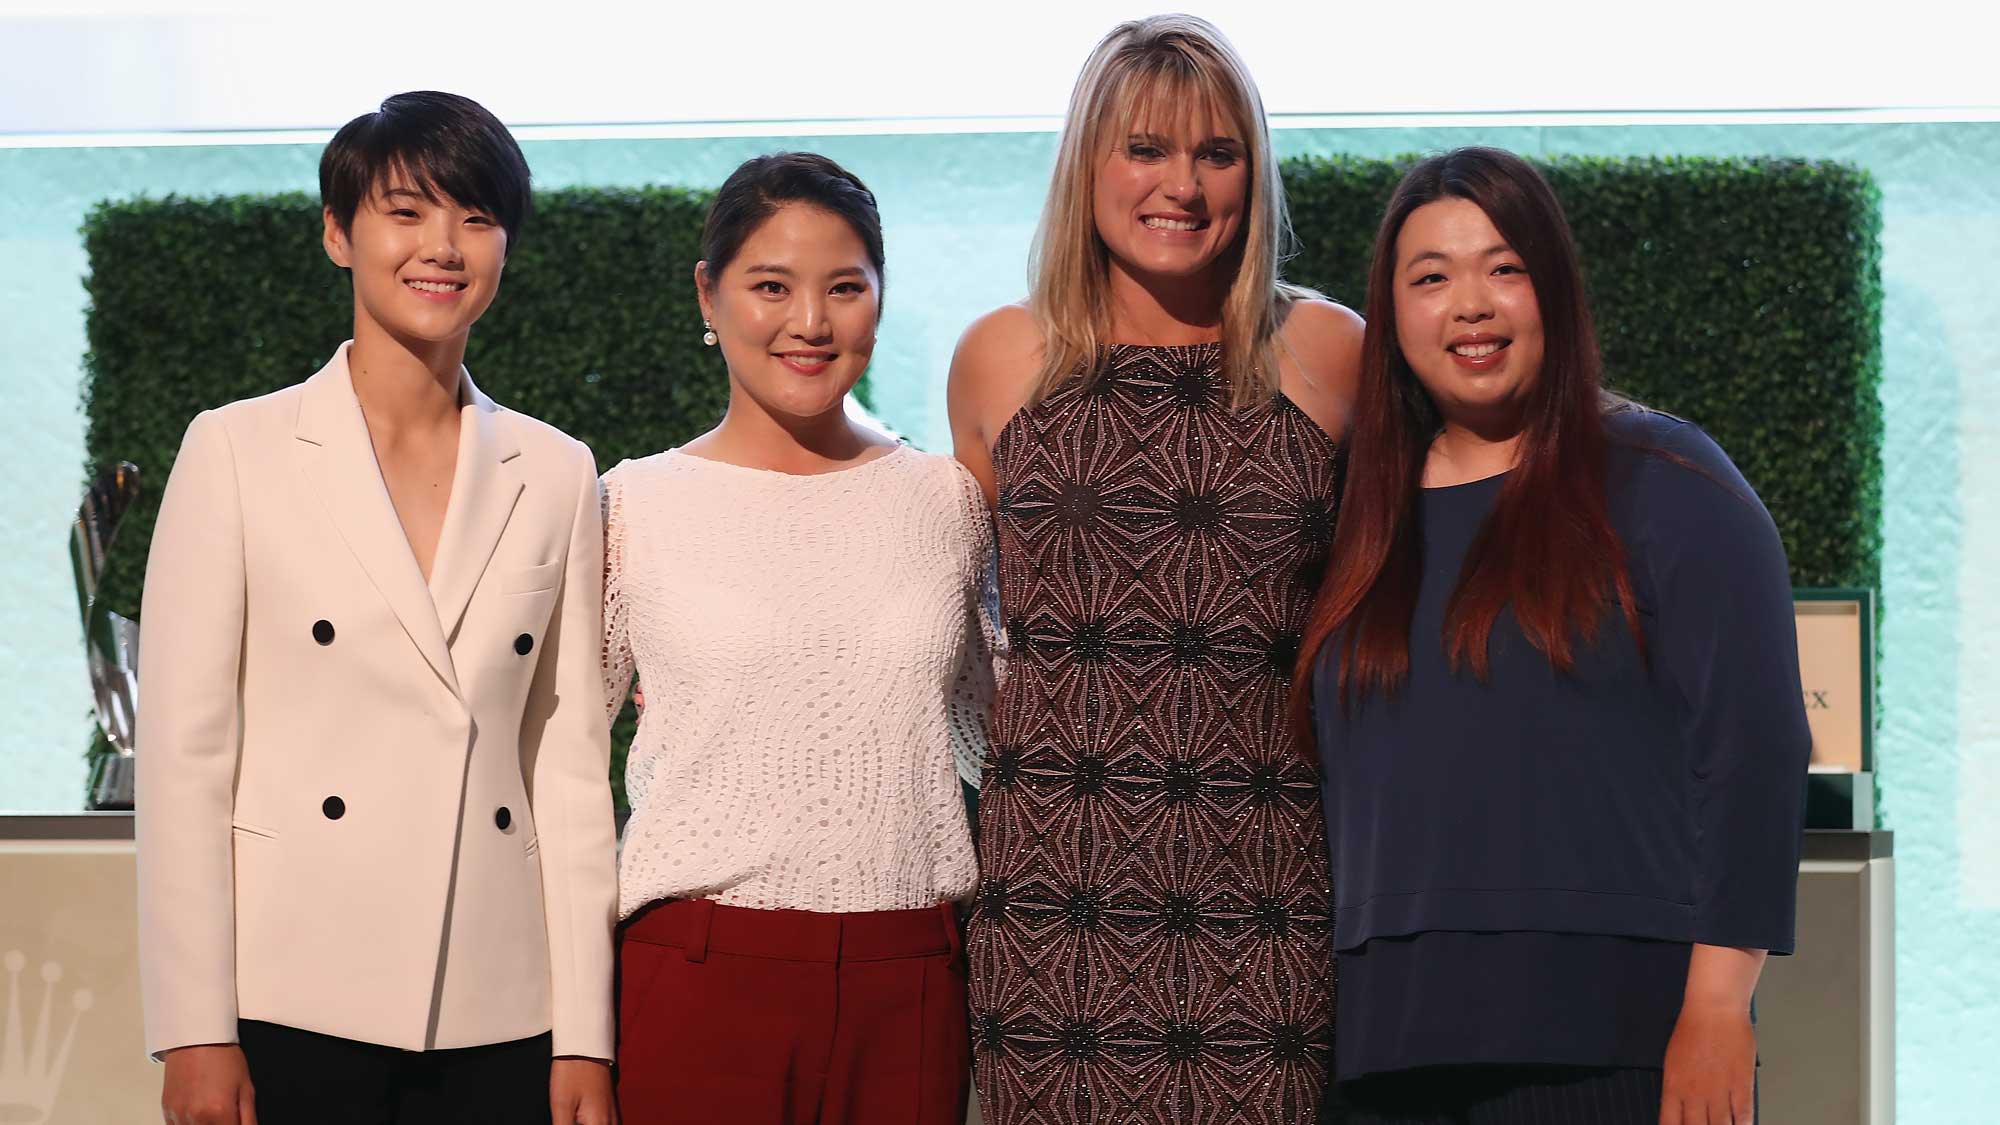 (L-R) Sung Hyun Park of Korea, So Yeon Ryu of Korea, Lexi Thompson of the United States and Shanshan Feng of China pose during the LPGA Rolex Players Awards at The Ritz-Carlton Golf Resort